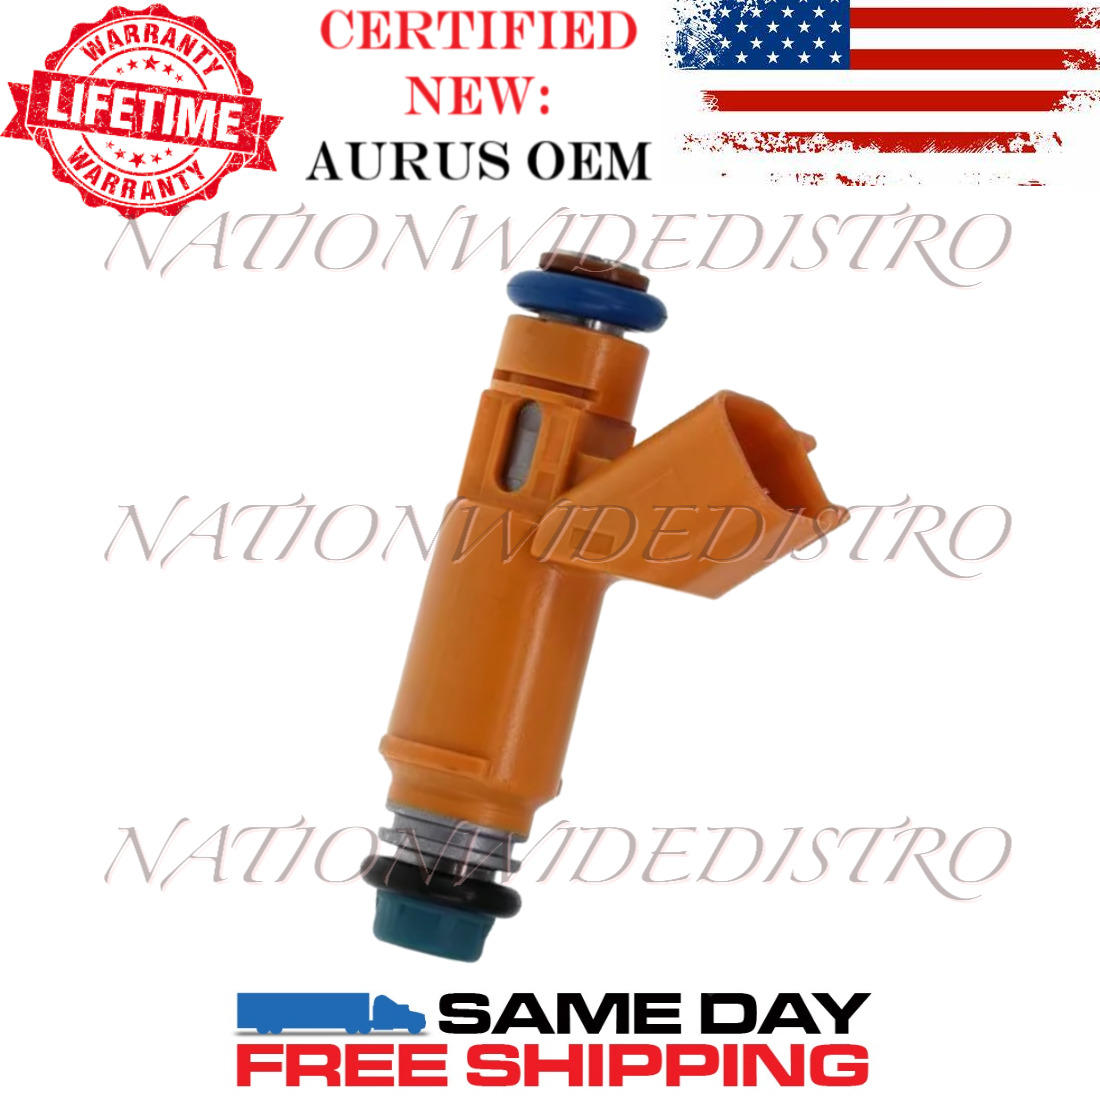 1x OEM NEW AURUS Fuel Injector for 2006-2009 Land Rover Range Rover 4.4L V8